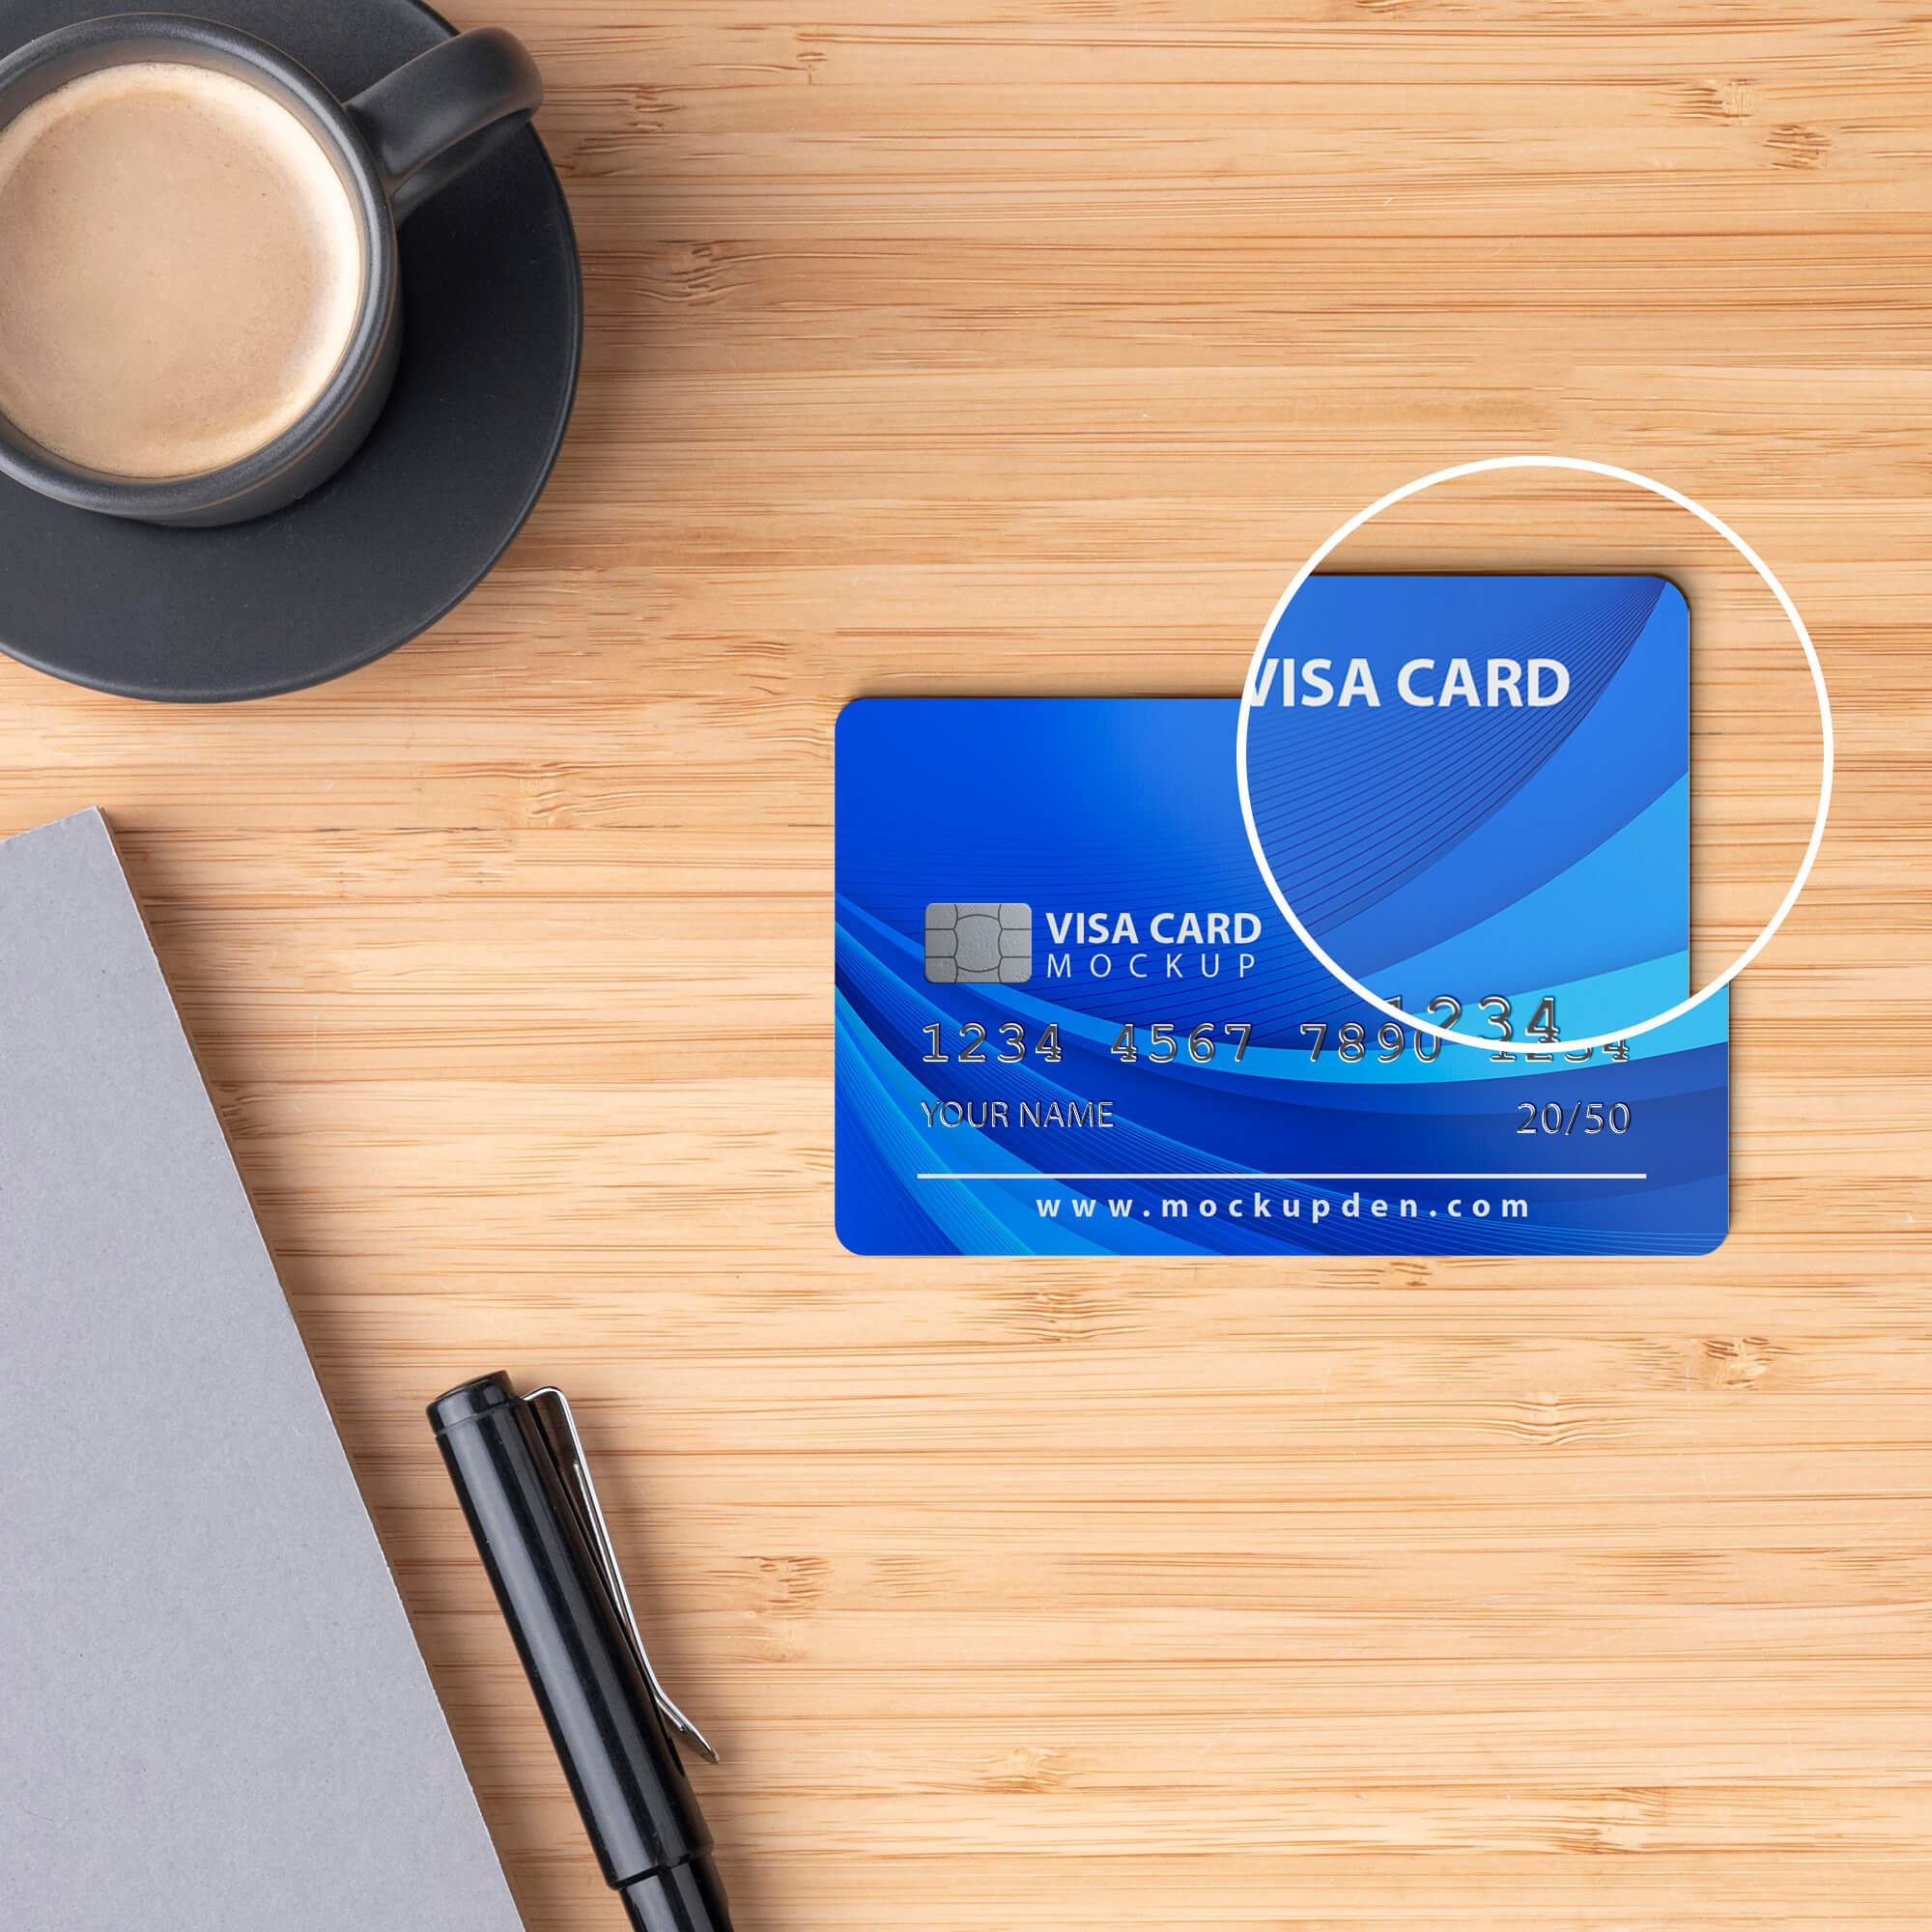 Visa (Card): The dominant bankcard company in the world, with a 50% market share of total plastic payments. 2000x2000 HD Wallpaper.